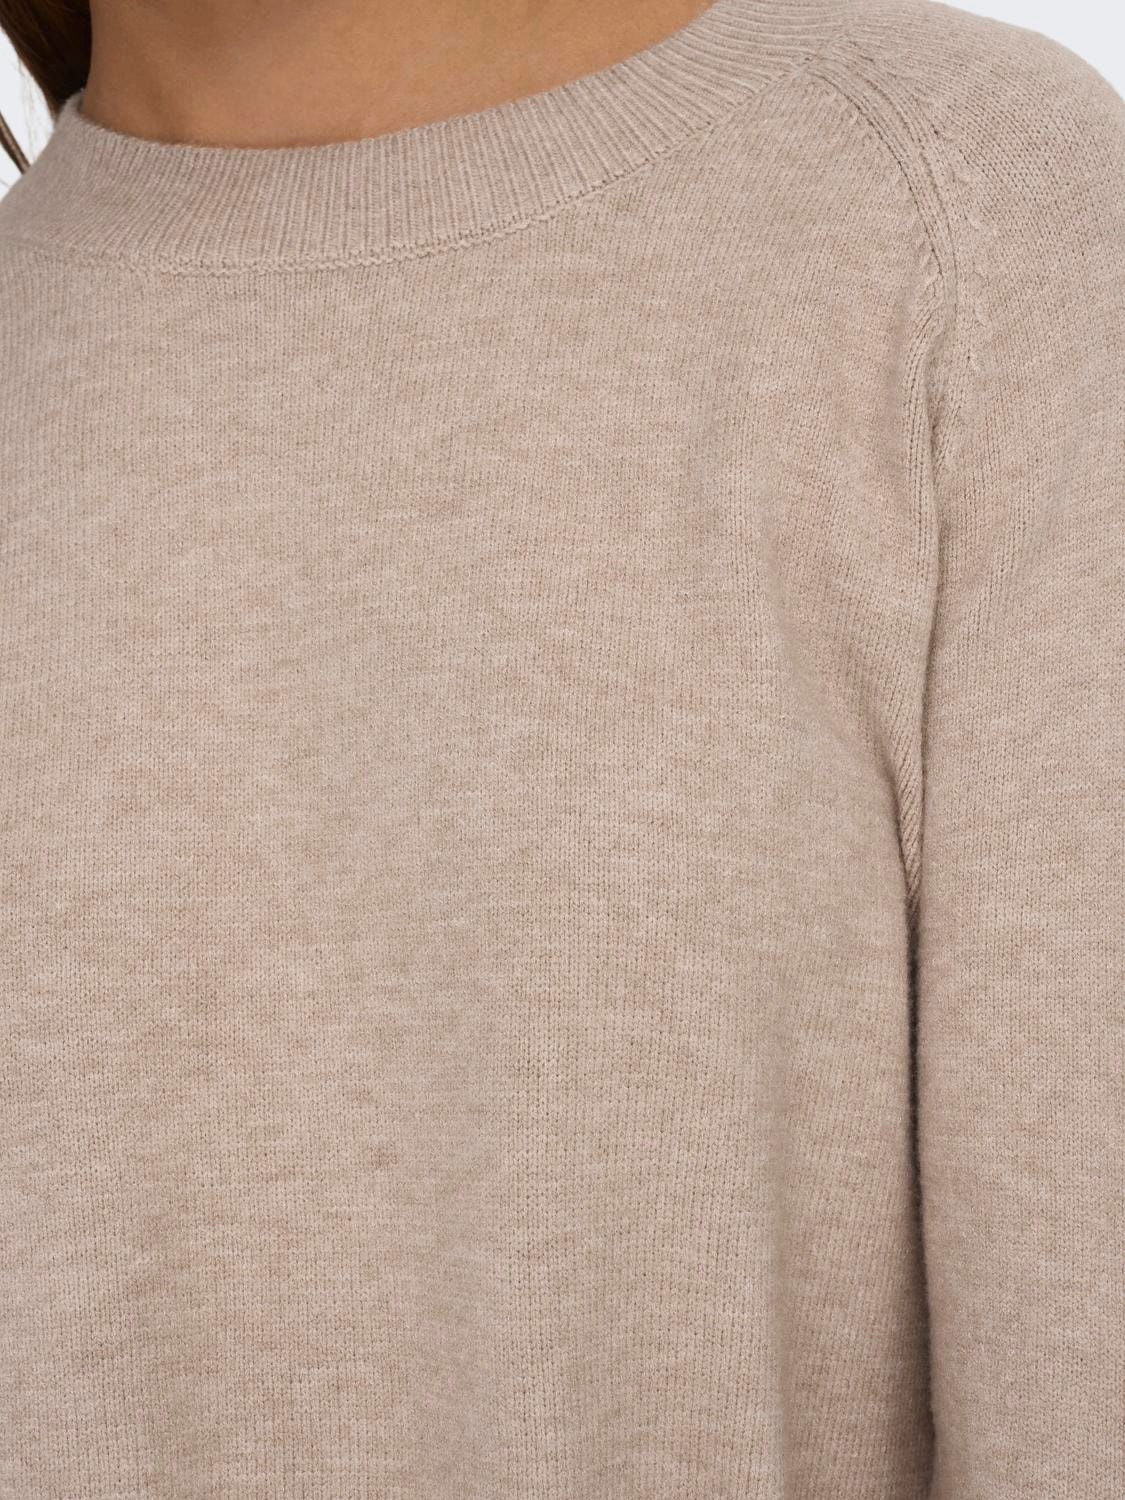 ONLY Knit Fit Round Neck Pullover -Beige - 15292897